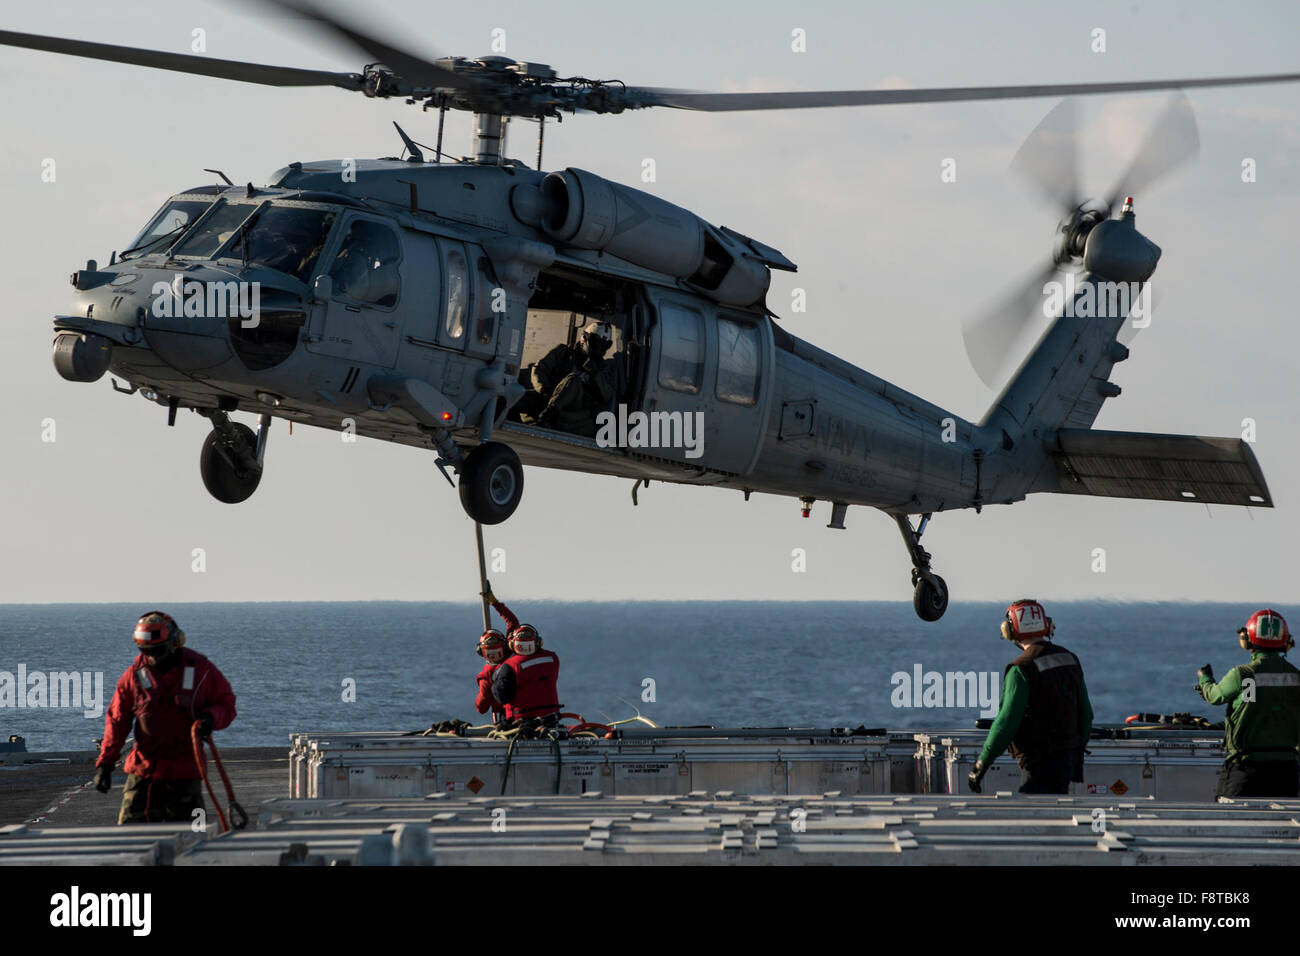 Sailors connect a cargo pendant to an MH-60S Seahawk, Sikorsky SH-60/MH-60 Seahawk, from the “Island Knights” of Helicopter Sea Combat Squadron (HSC) 25 on the flight deck of the U.S. Navy's only forward-deployed aircraft carrier USS Ronald Reagan. Stock Photo